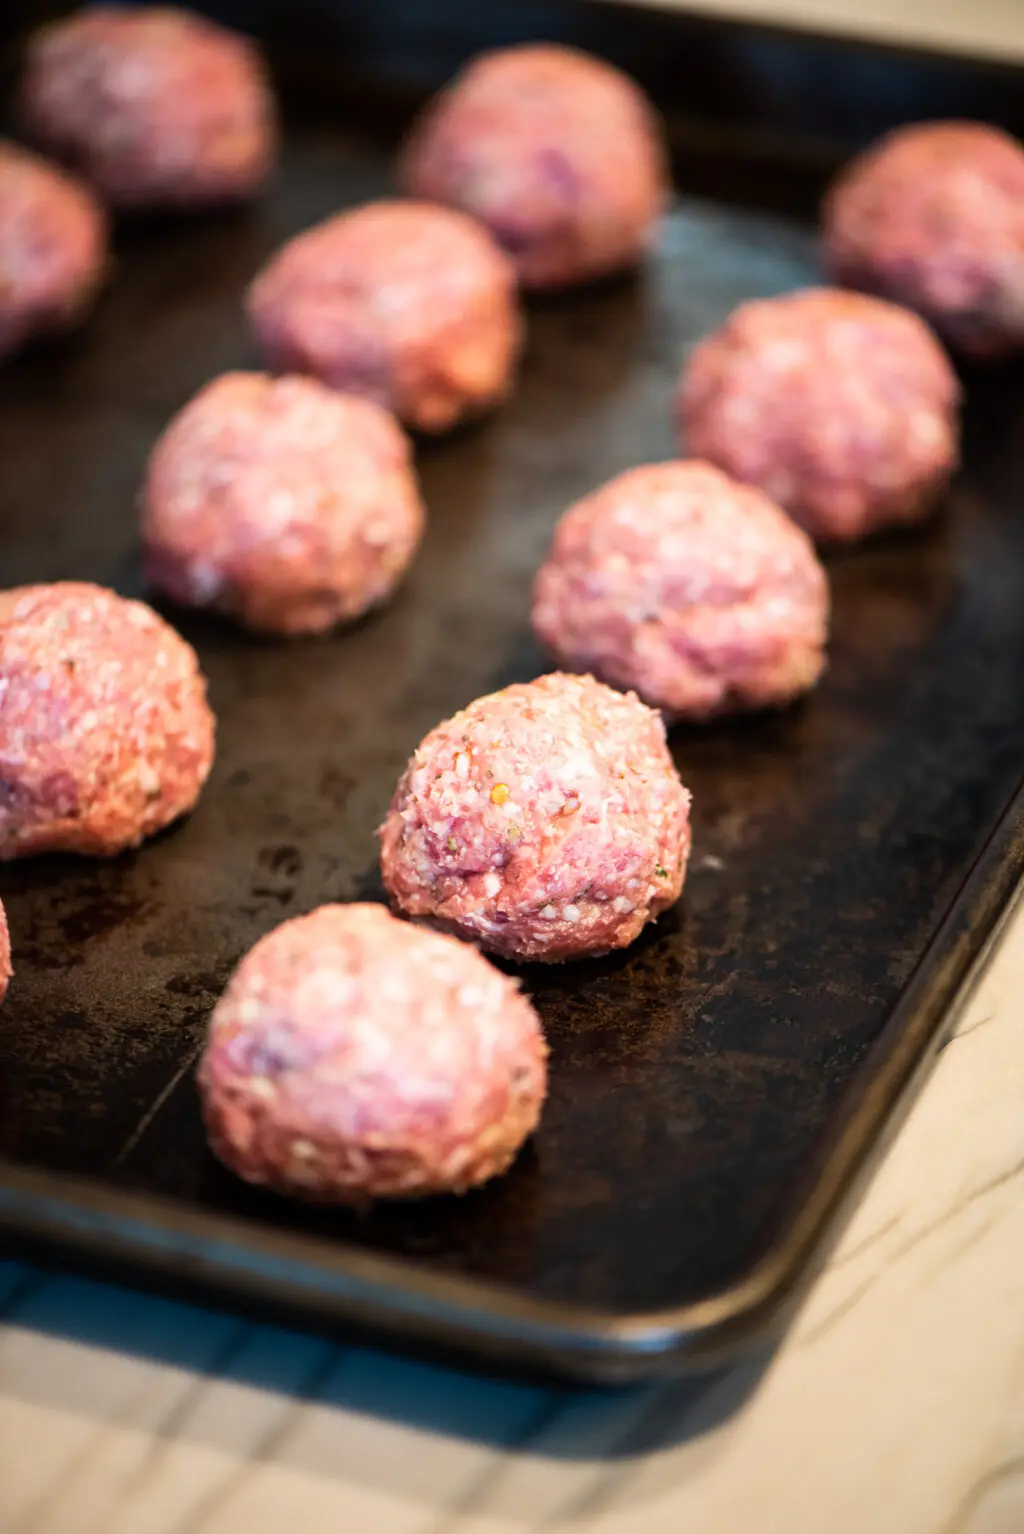 Placing lamb meatballs on baking sheet before baking in oven